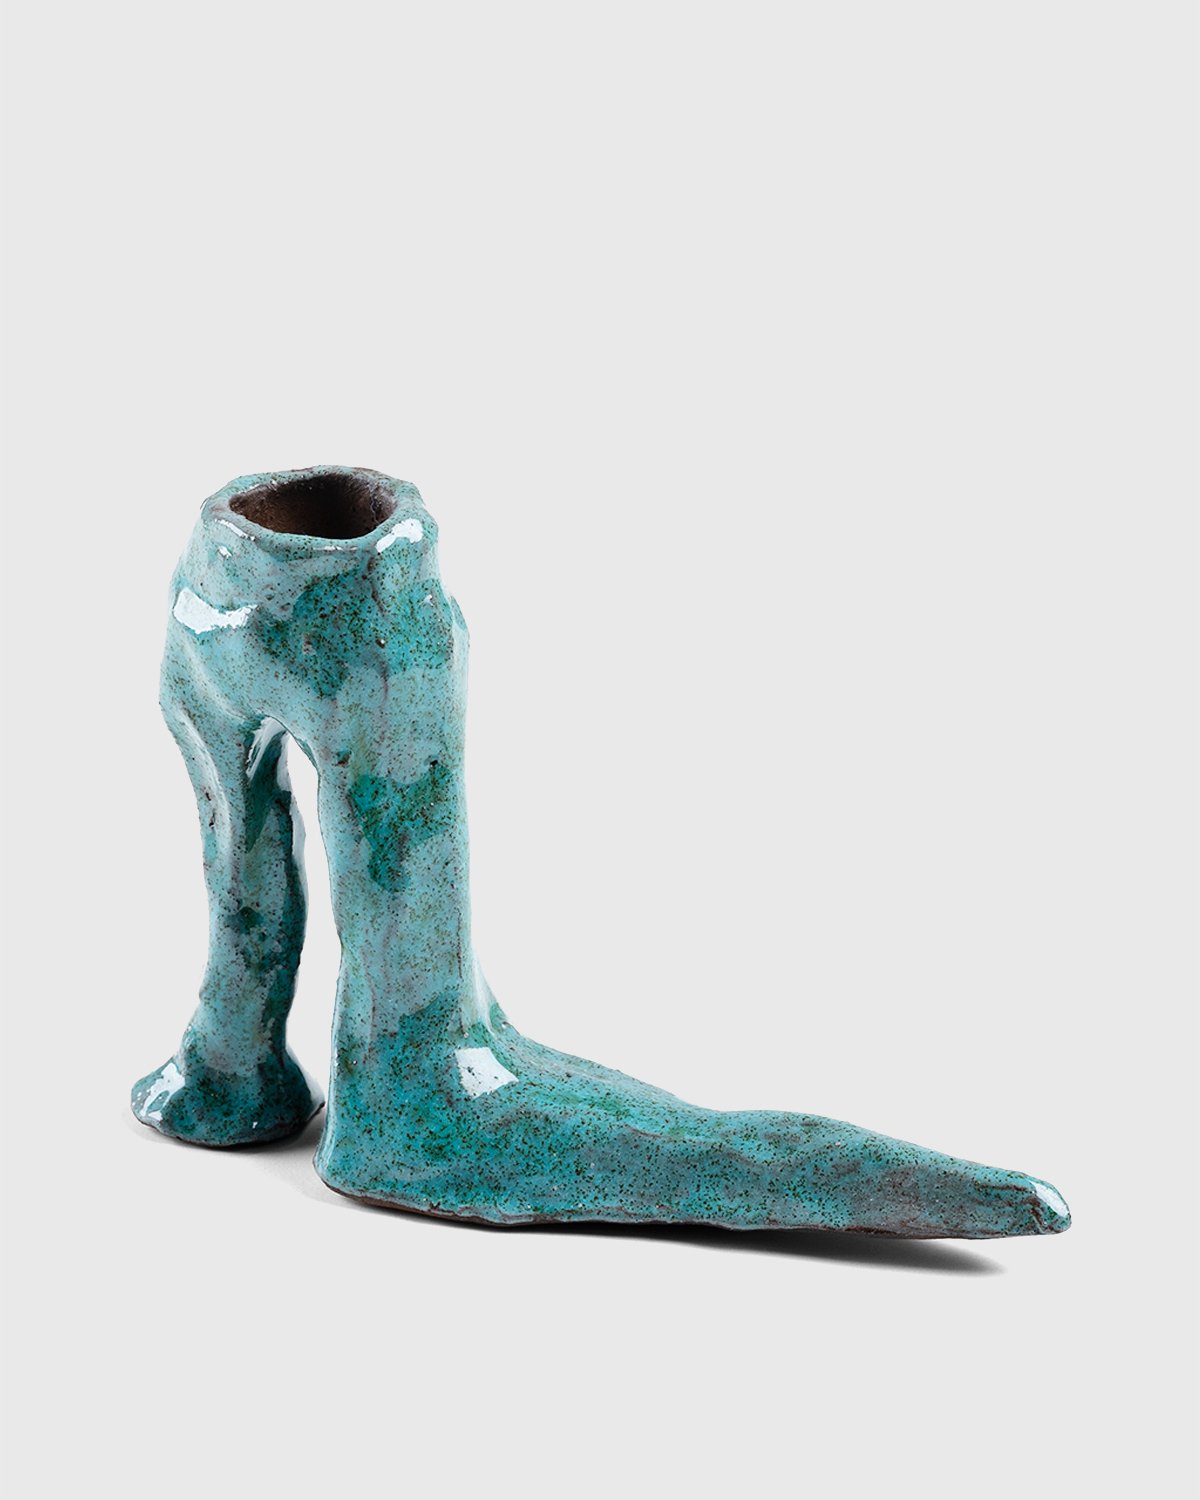 Laura Welker - Candle Holder Turquoise - Lifestyle - Green - Image 2